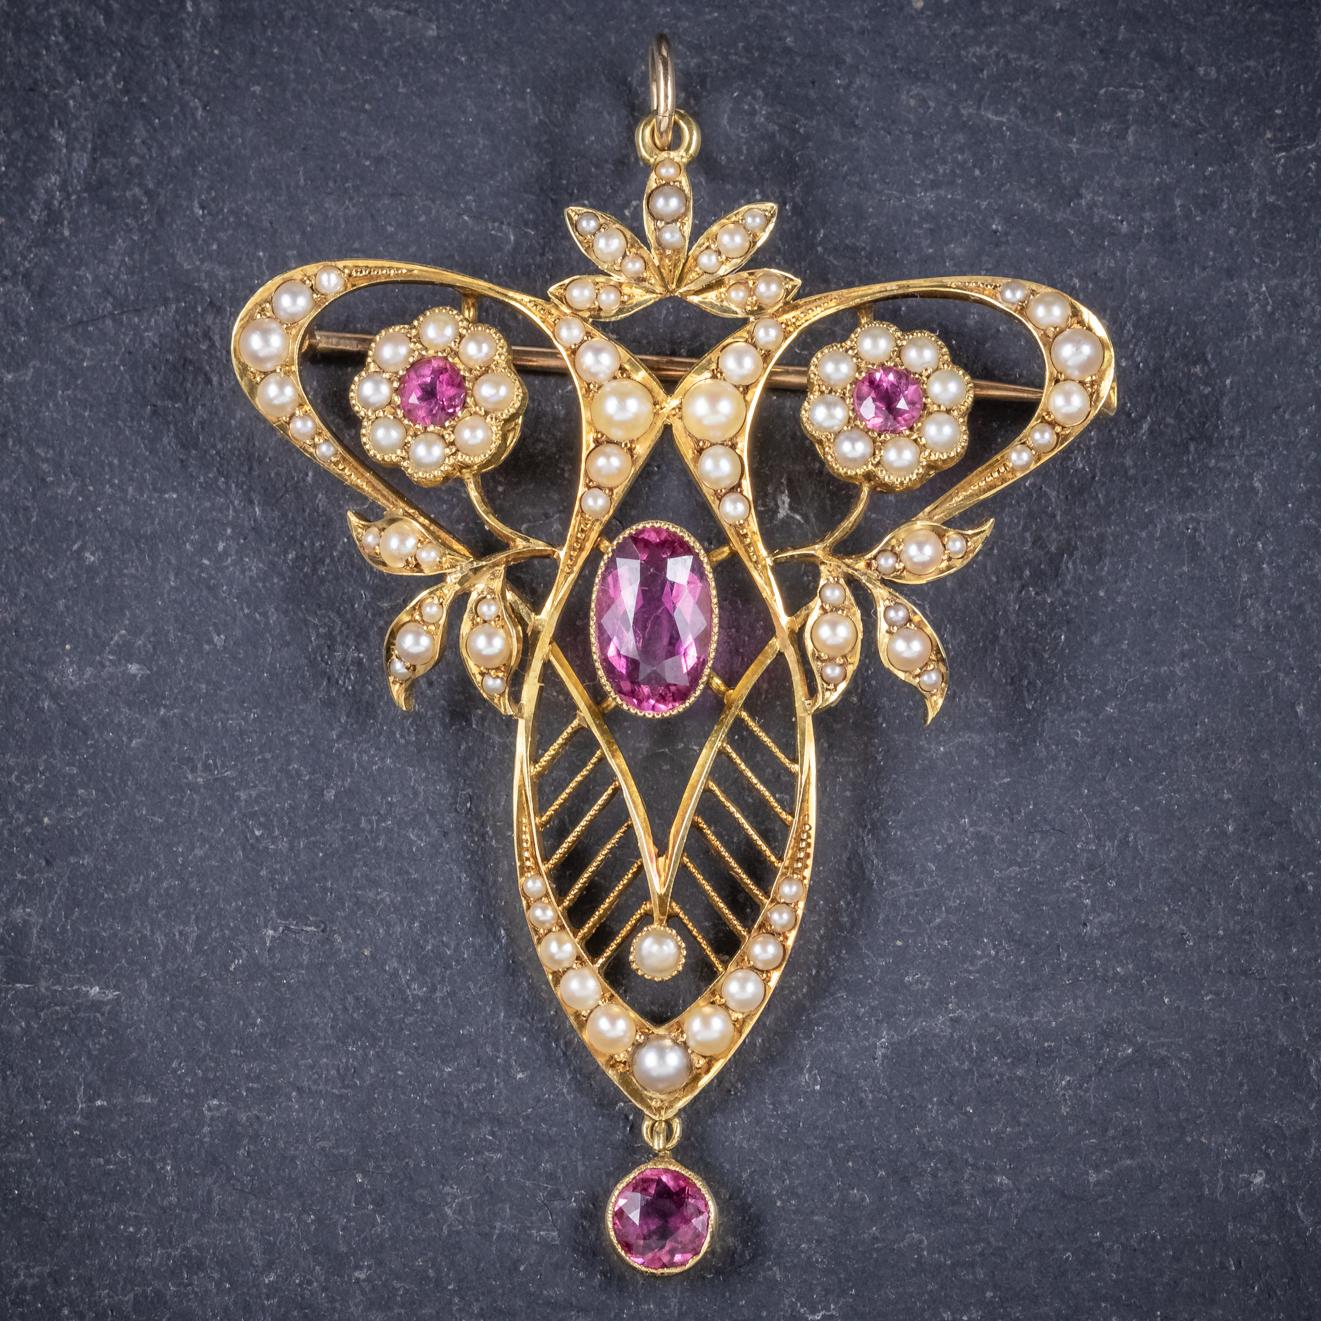 A fabulous antique Victorian floral pendant/ brooch C. 1900, set with Pink Tourmalines and lovely natural Pearls. 

The central pink Tourmaline is approx. 1ct with a 0.22ct dropper and two 0.10ct stones crowned upon flowers. 

The gallery is stamped